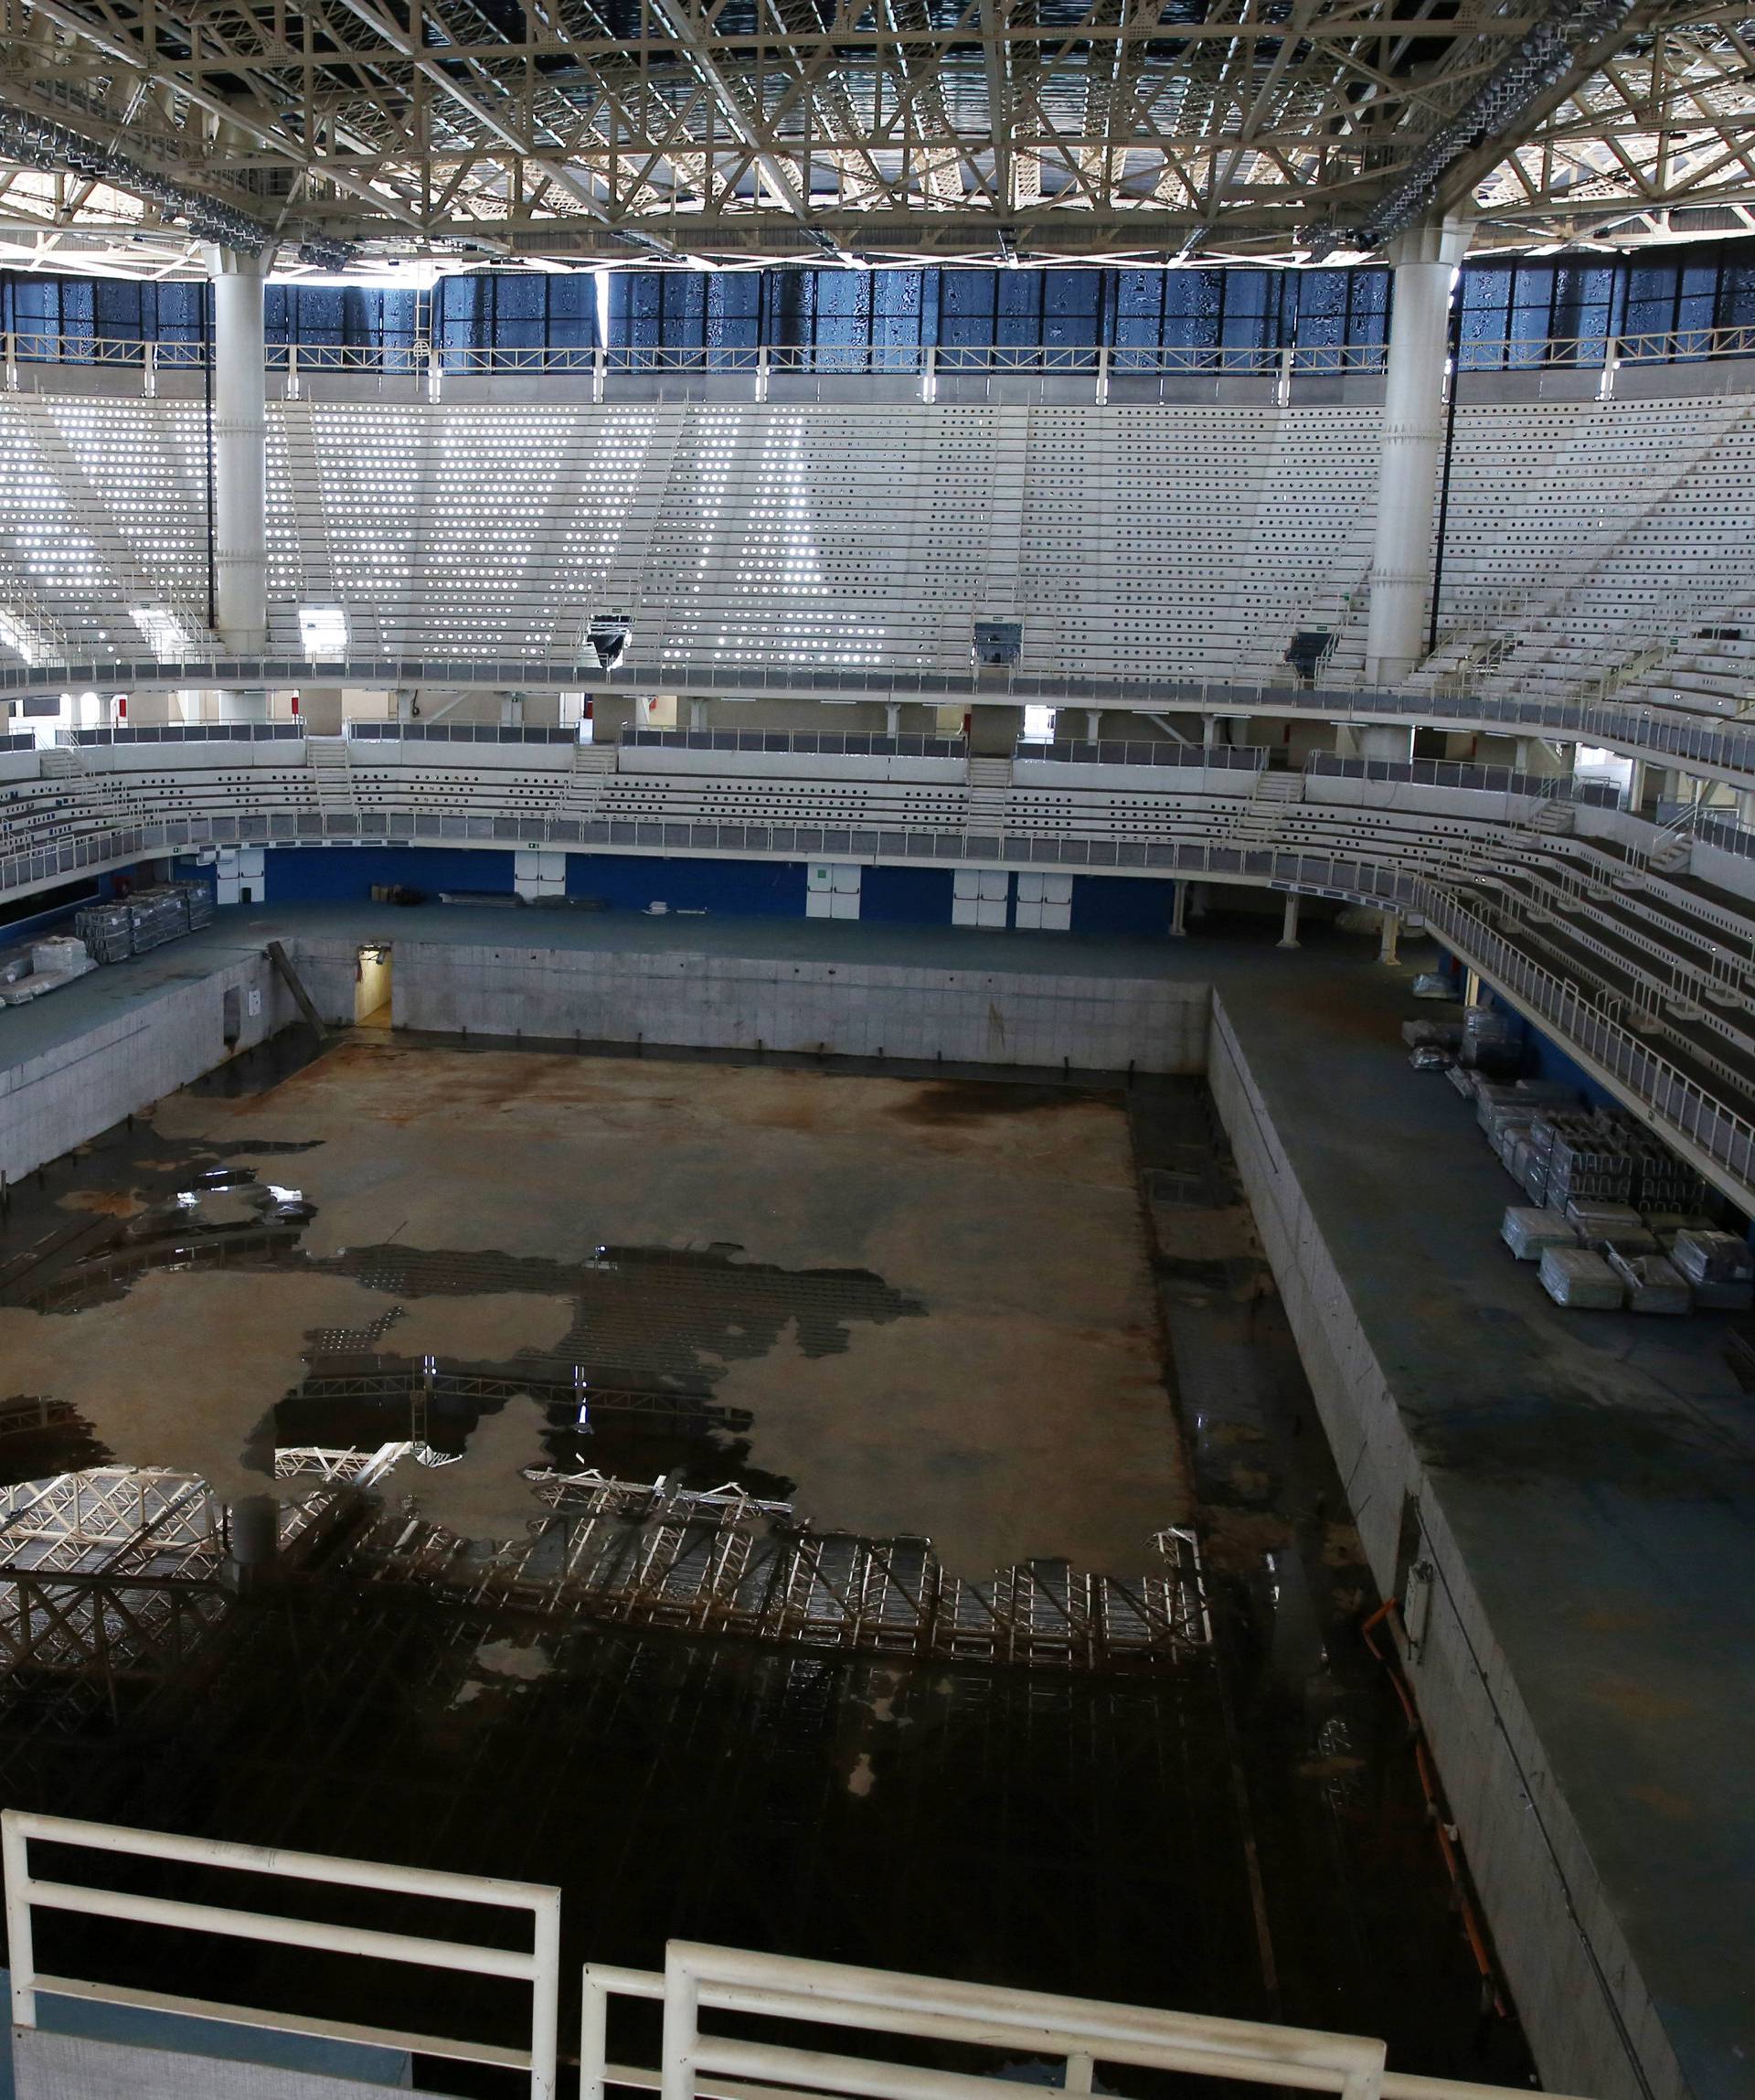 A view of the Olympic Aquatics Stadium, which was used for the Rio 2016 Olympic Games, is seen in Rio de Janeiro